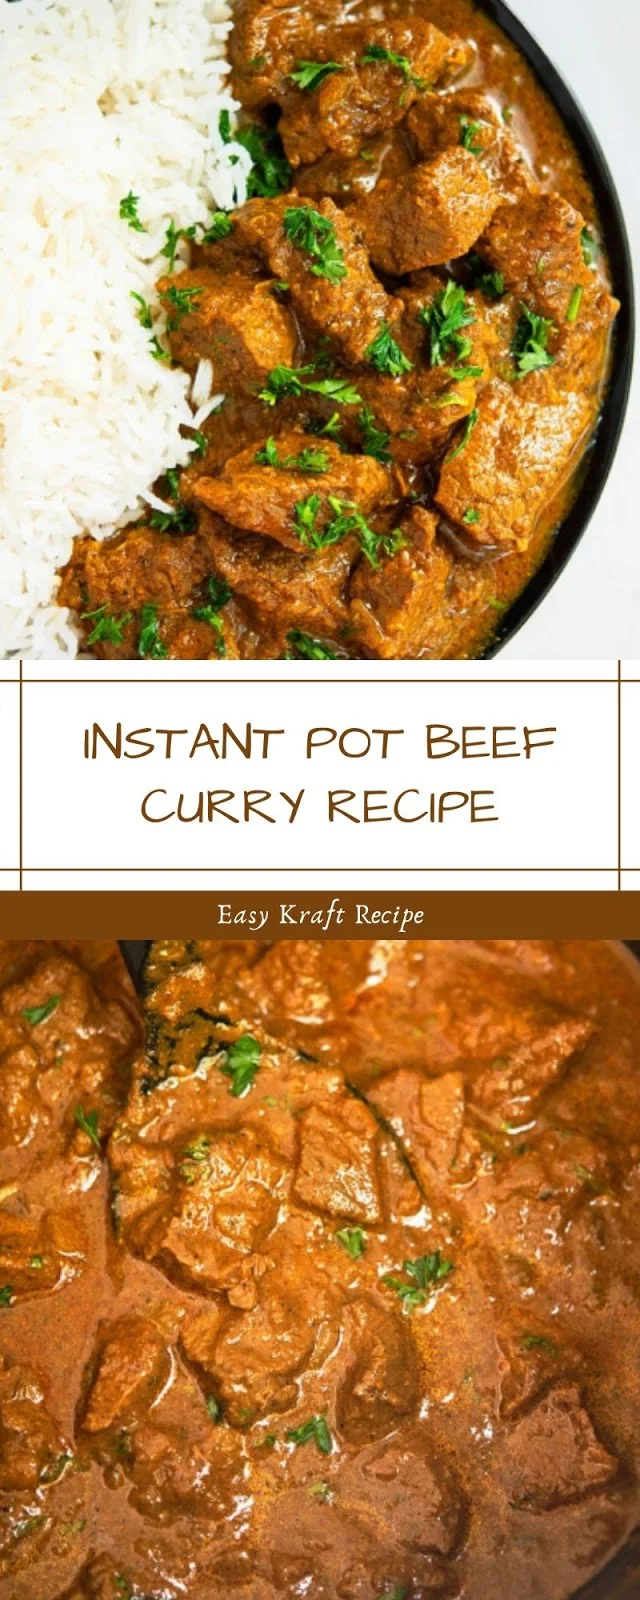 INSTANT POT BEEF CURRY RECIPE